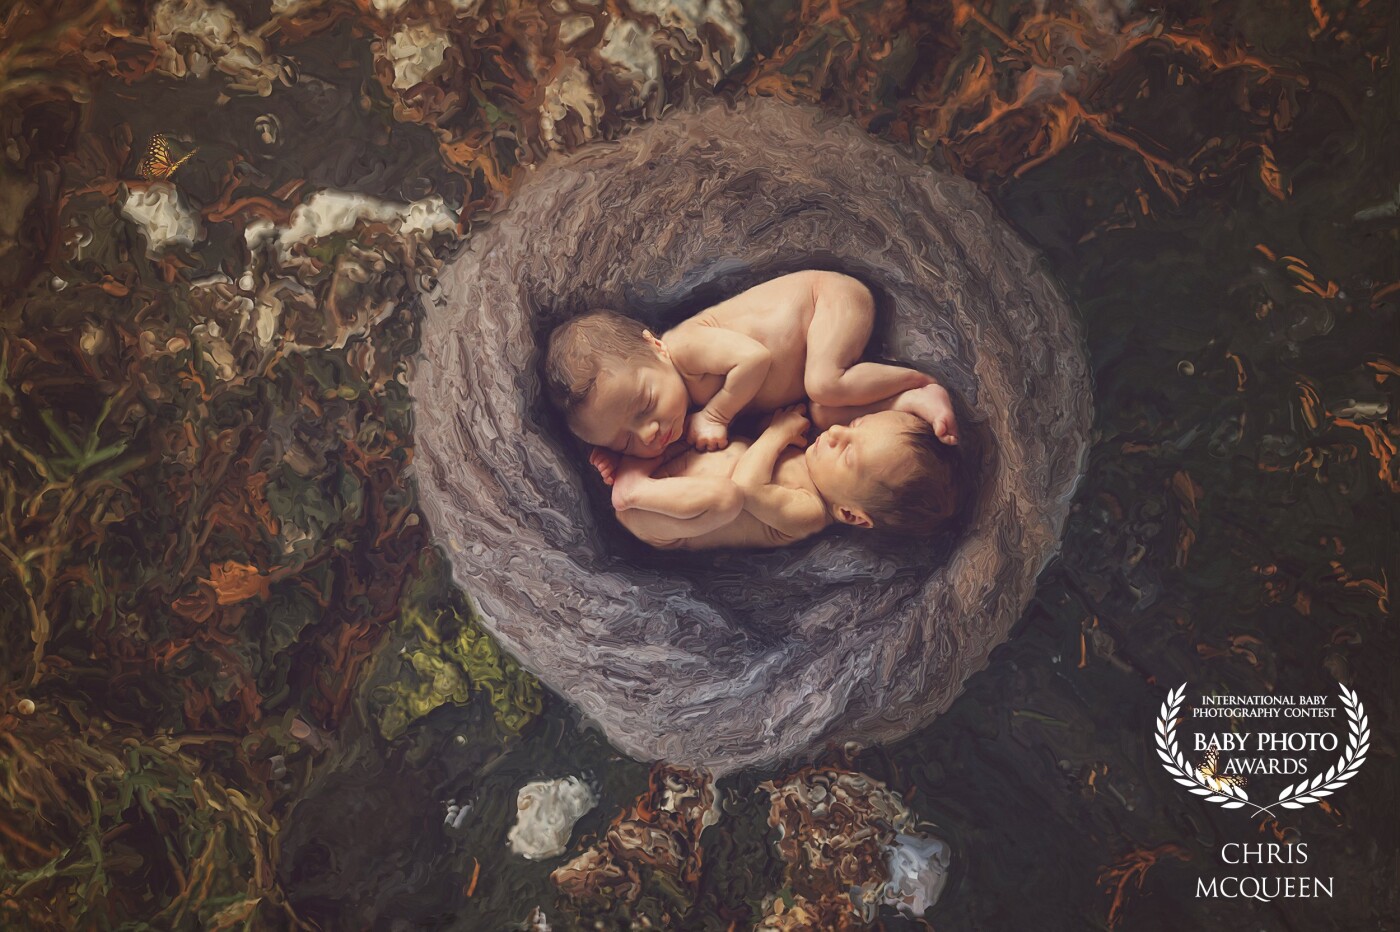 Twins Darci and Cooper. So tiny and adorable. <br />
This photo was taken at their home. They both slept beautifully during their Newborn Lifestyle Photography.